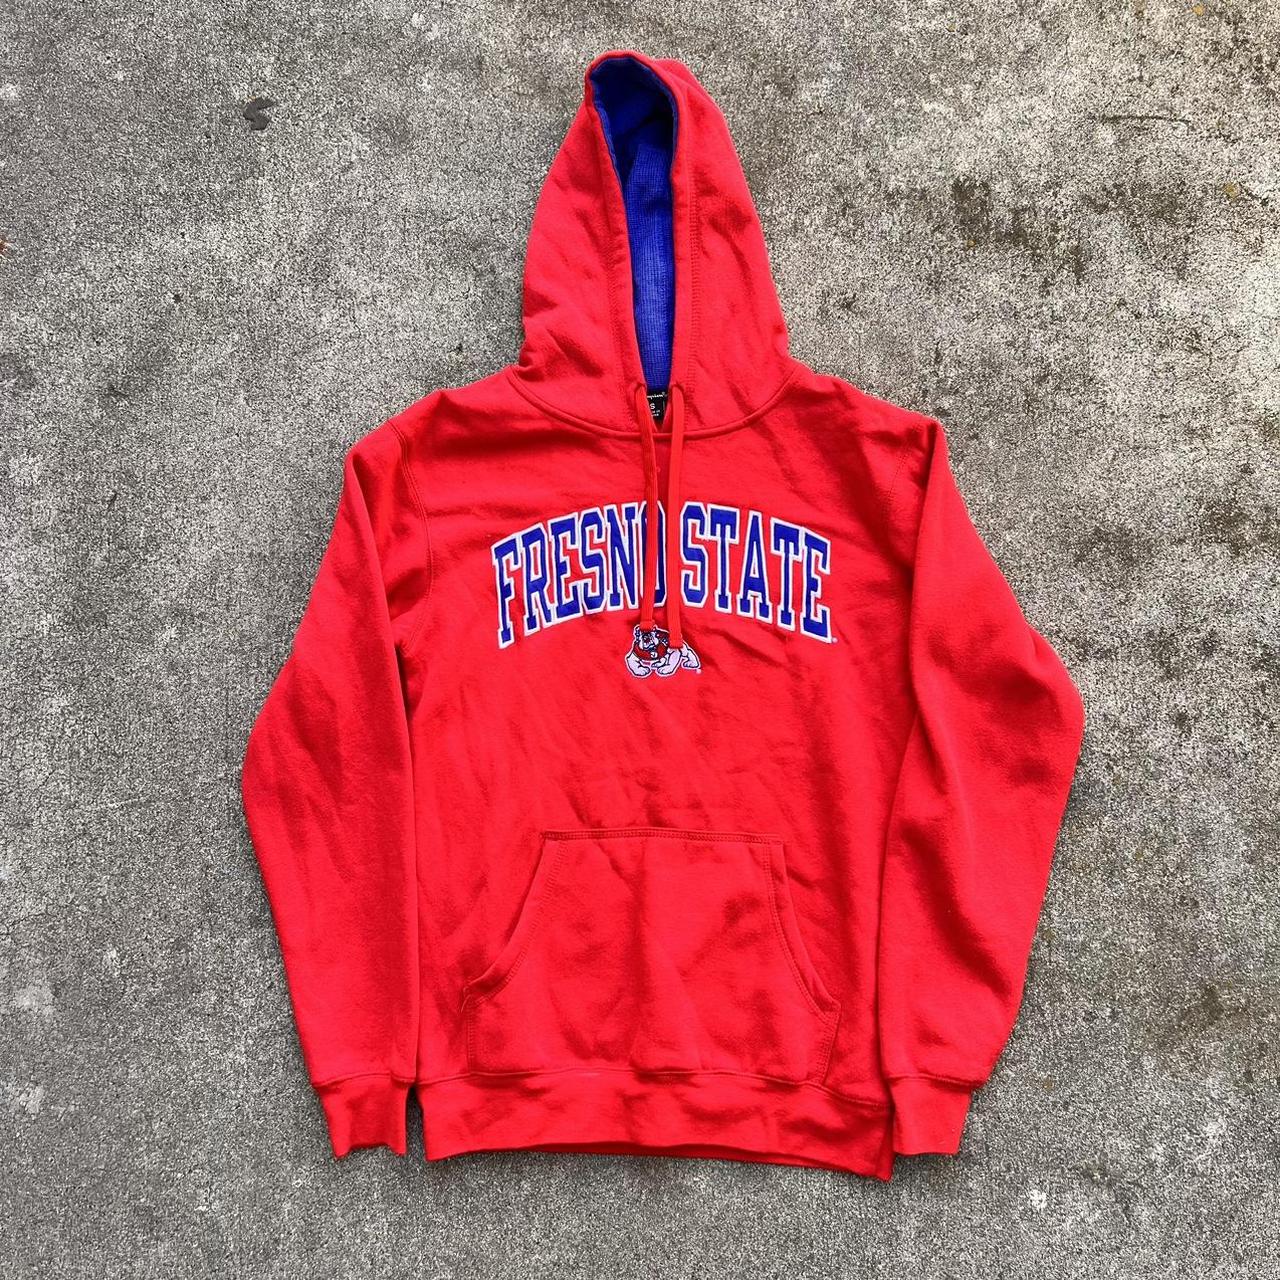 Red and blue Fresno state college hoodies great... - Depop